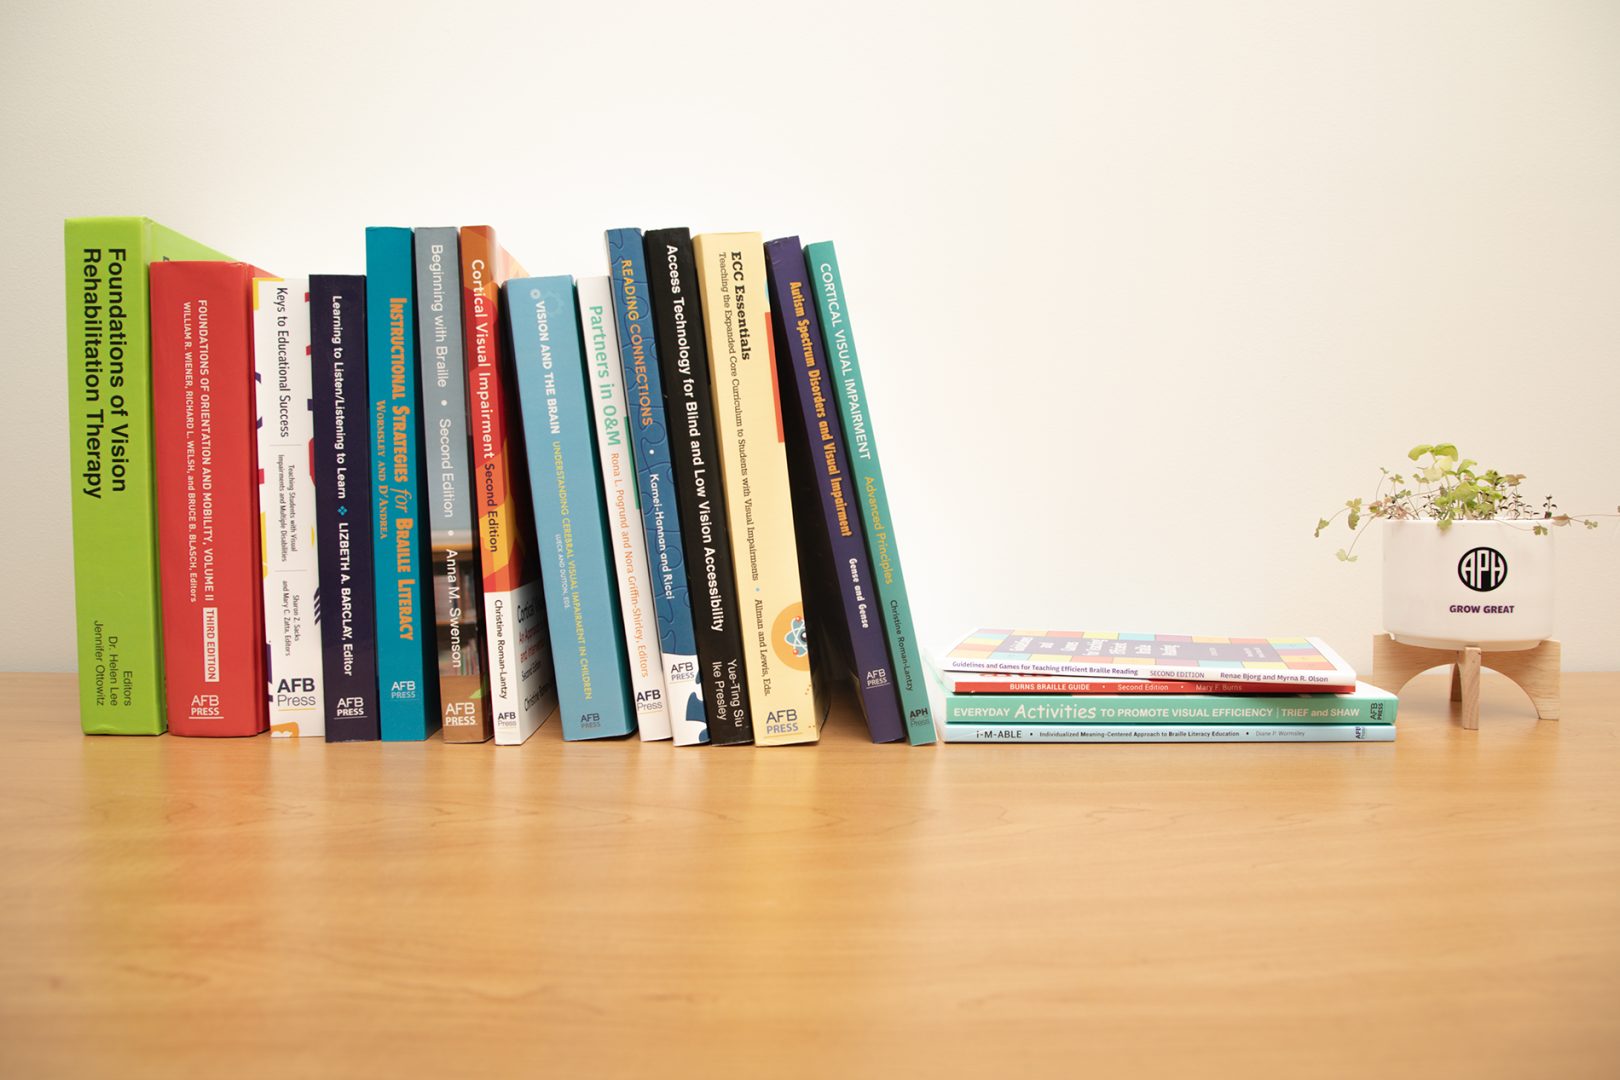 On a wooden surface against a white wall, several APH Press titles are stacked horizontally, including Foundations of Vision Rehabilitation Therapy, Cortical Visual Impairment, and ECC Essentials among many more! To the right of these is a short stack of vertically arranged titles. Next to those is a small white planter with an APH logo on a wooden stand containing a green sprouting plant.